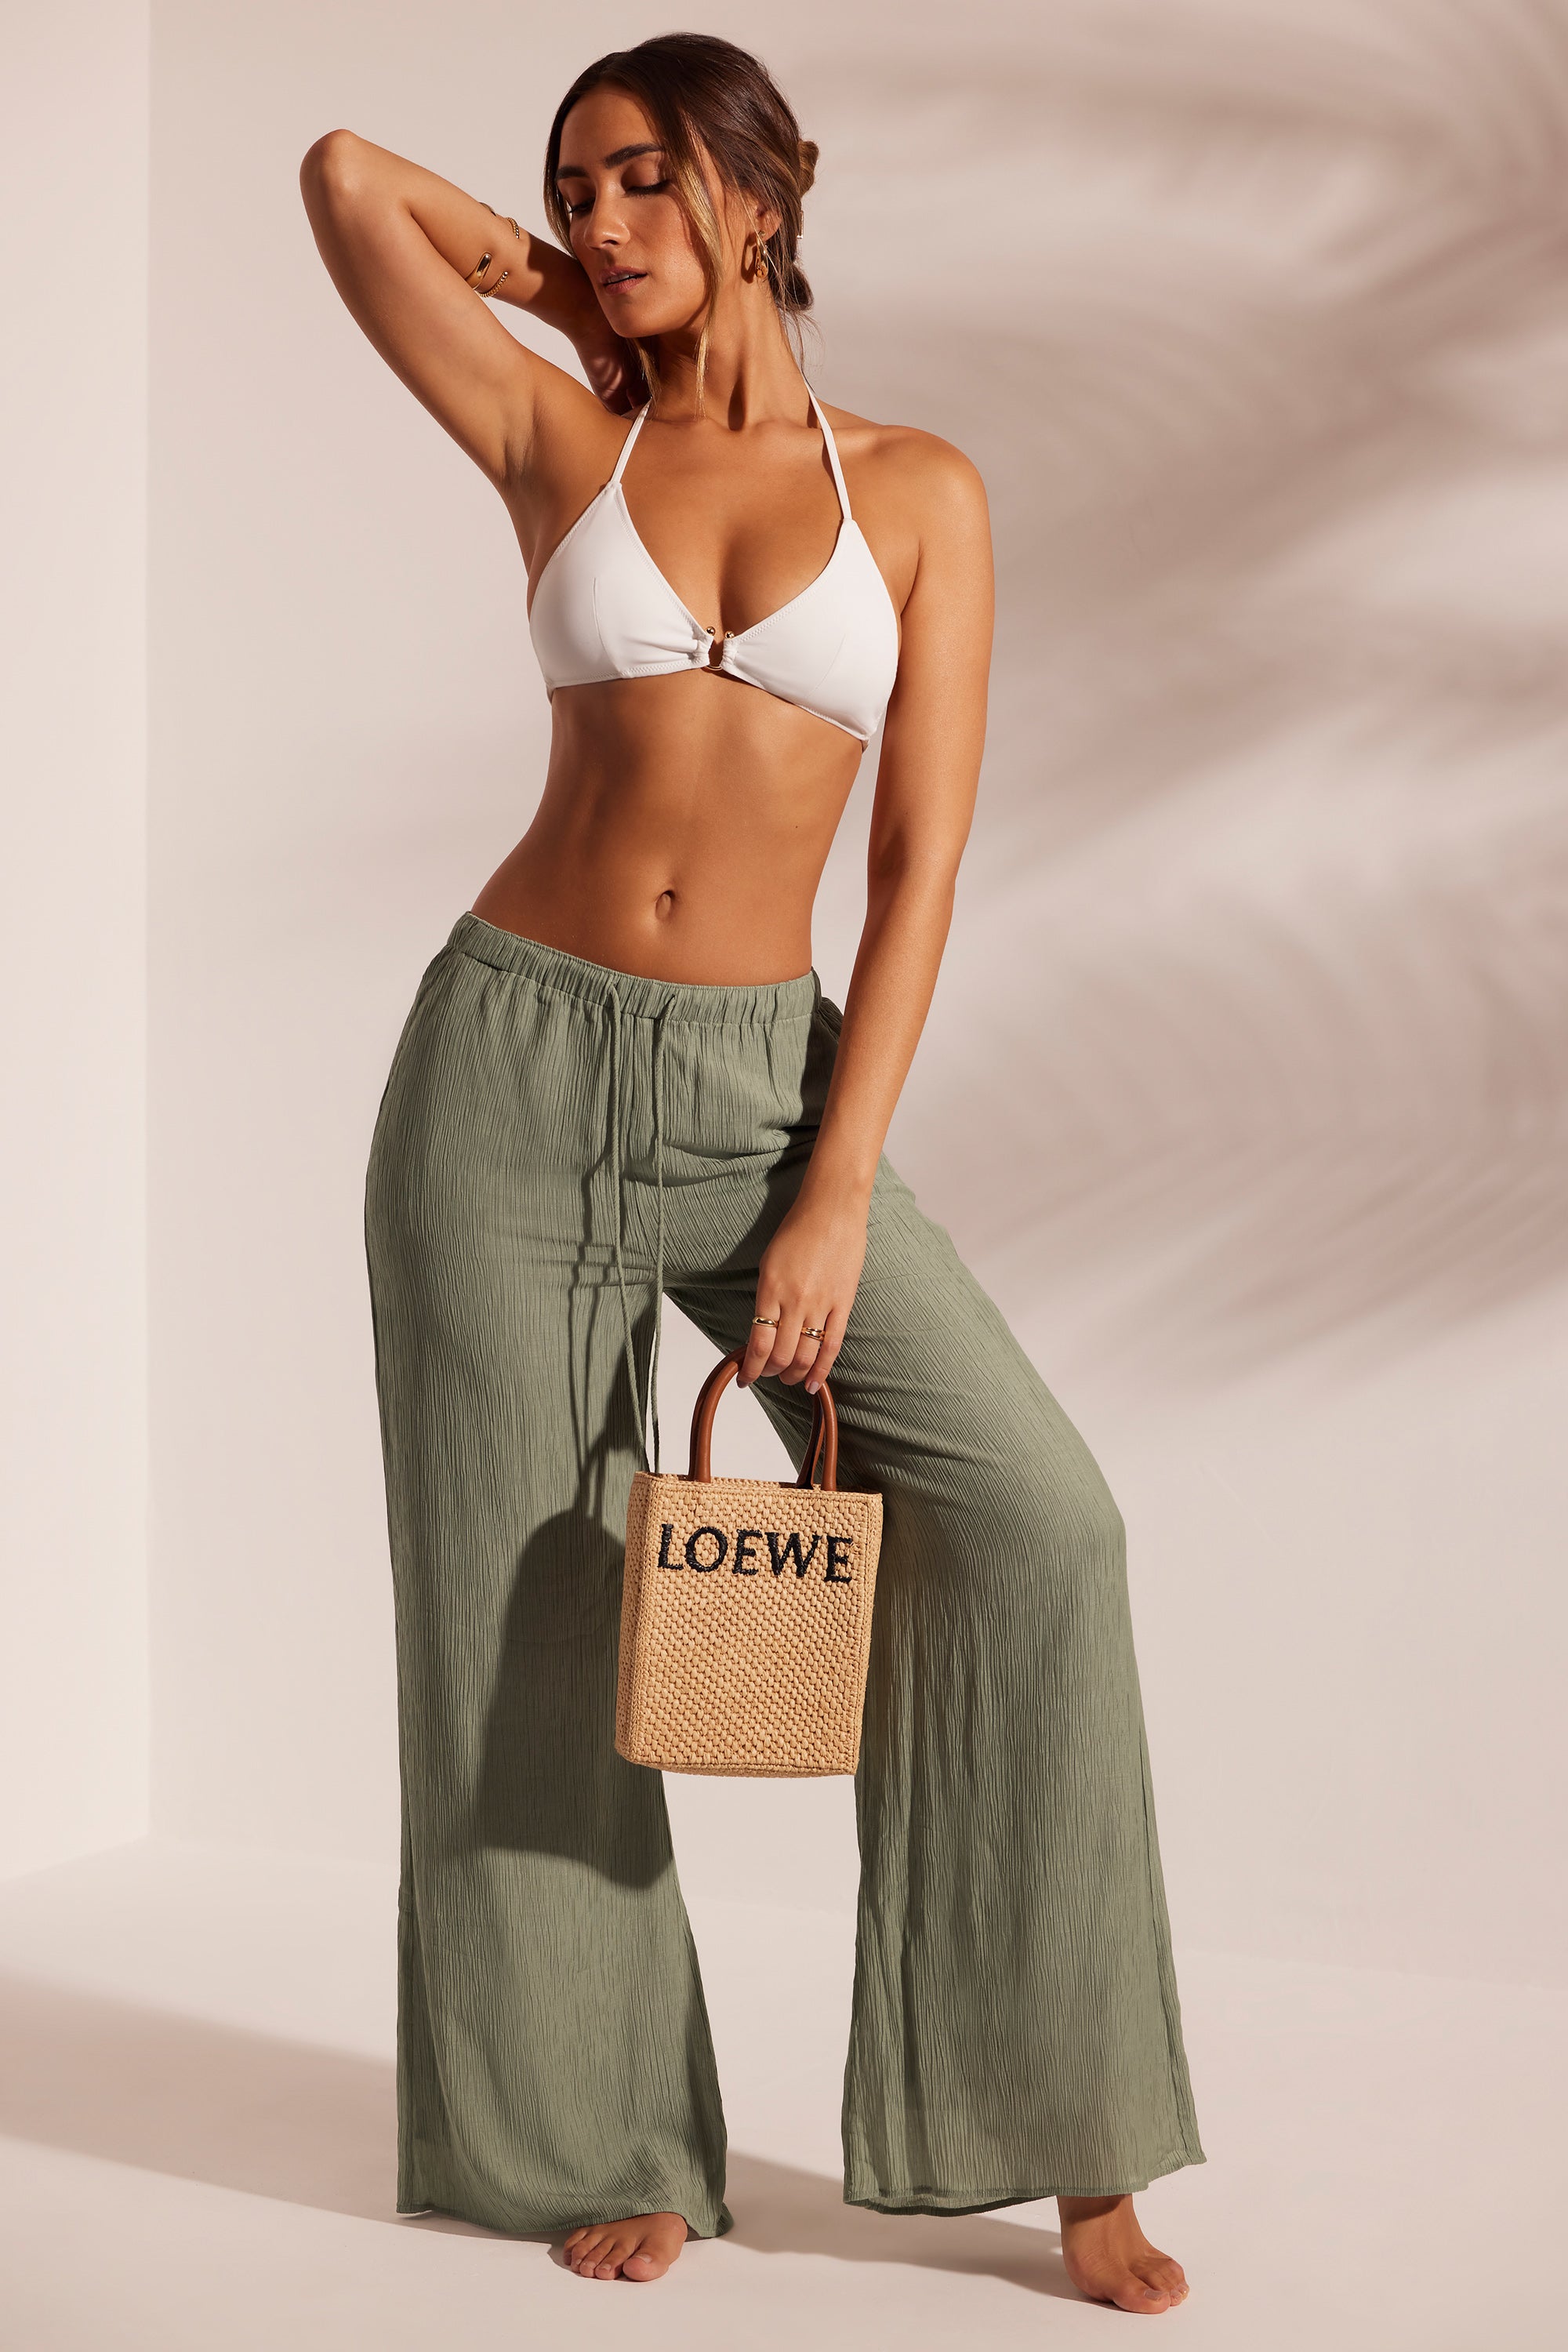 Dena Beach Pant Cover Up | Swimsuits For All